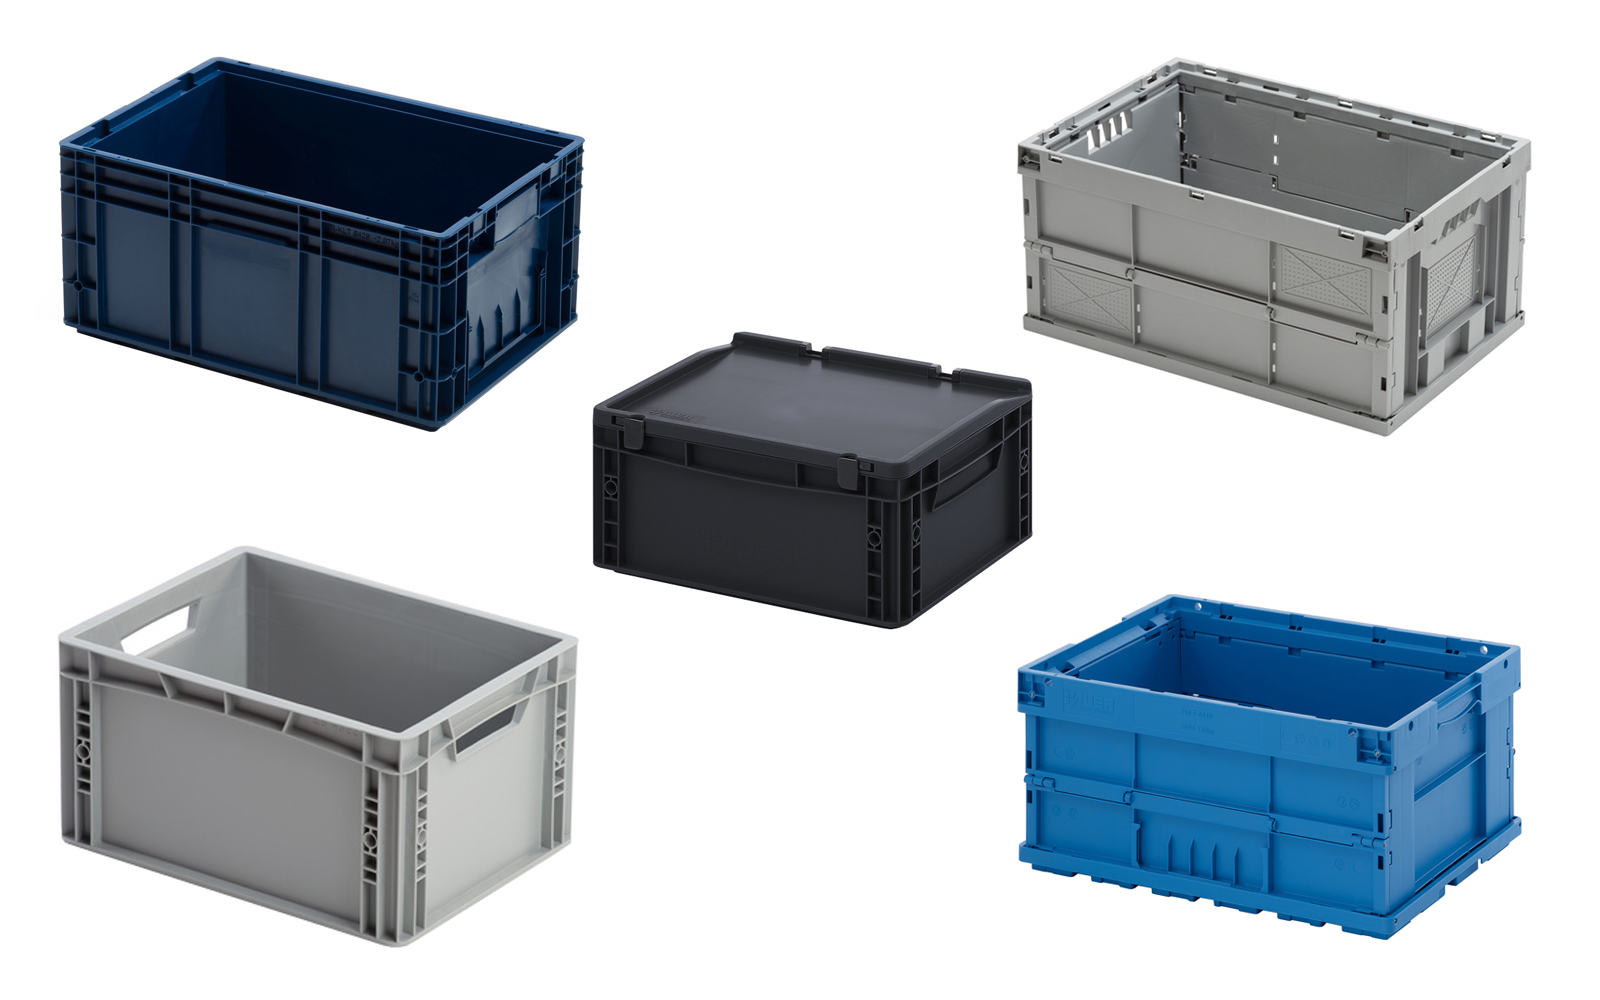 Injection molded boxes